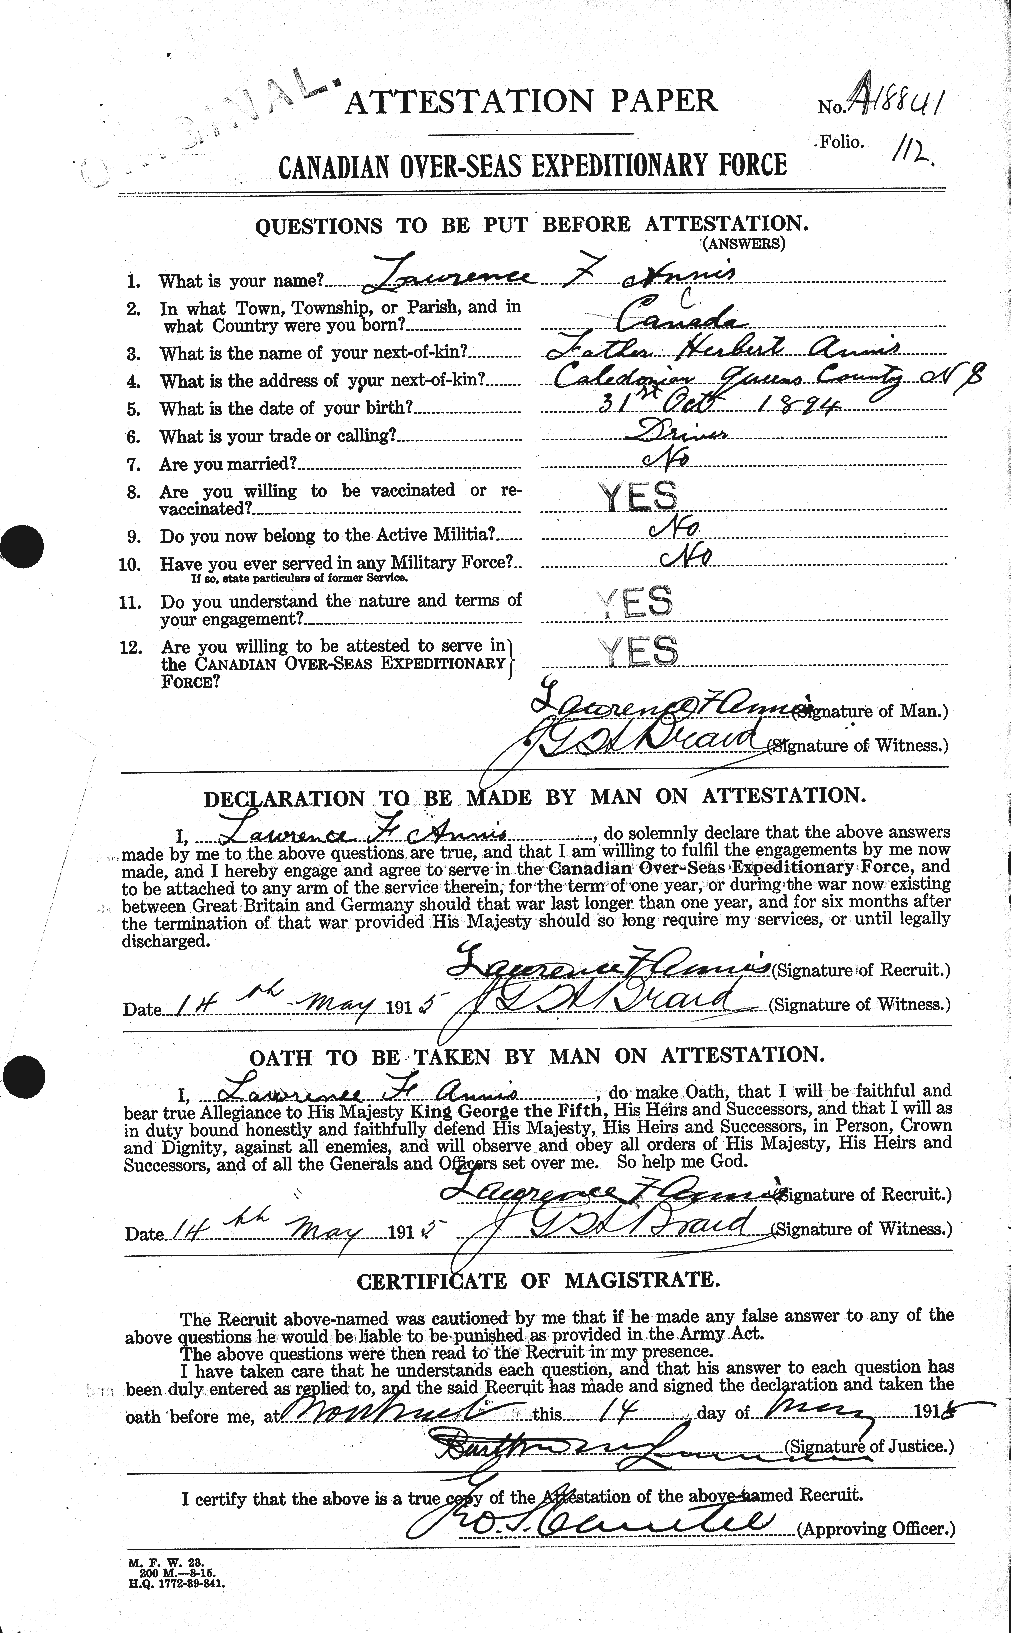 Personnel Records of the First World War - CEF 212403a